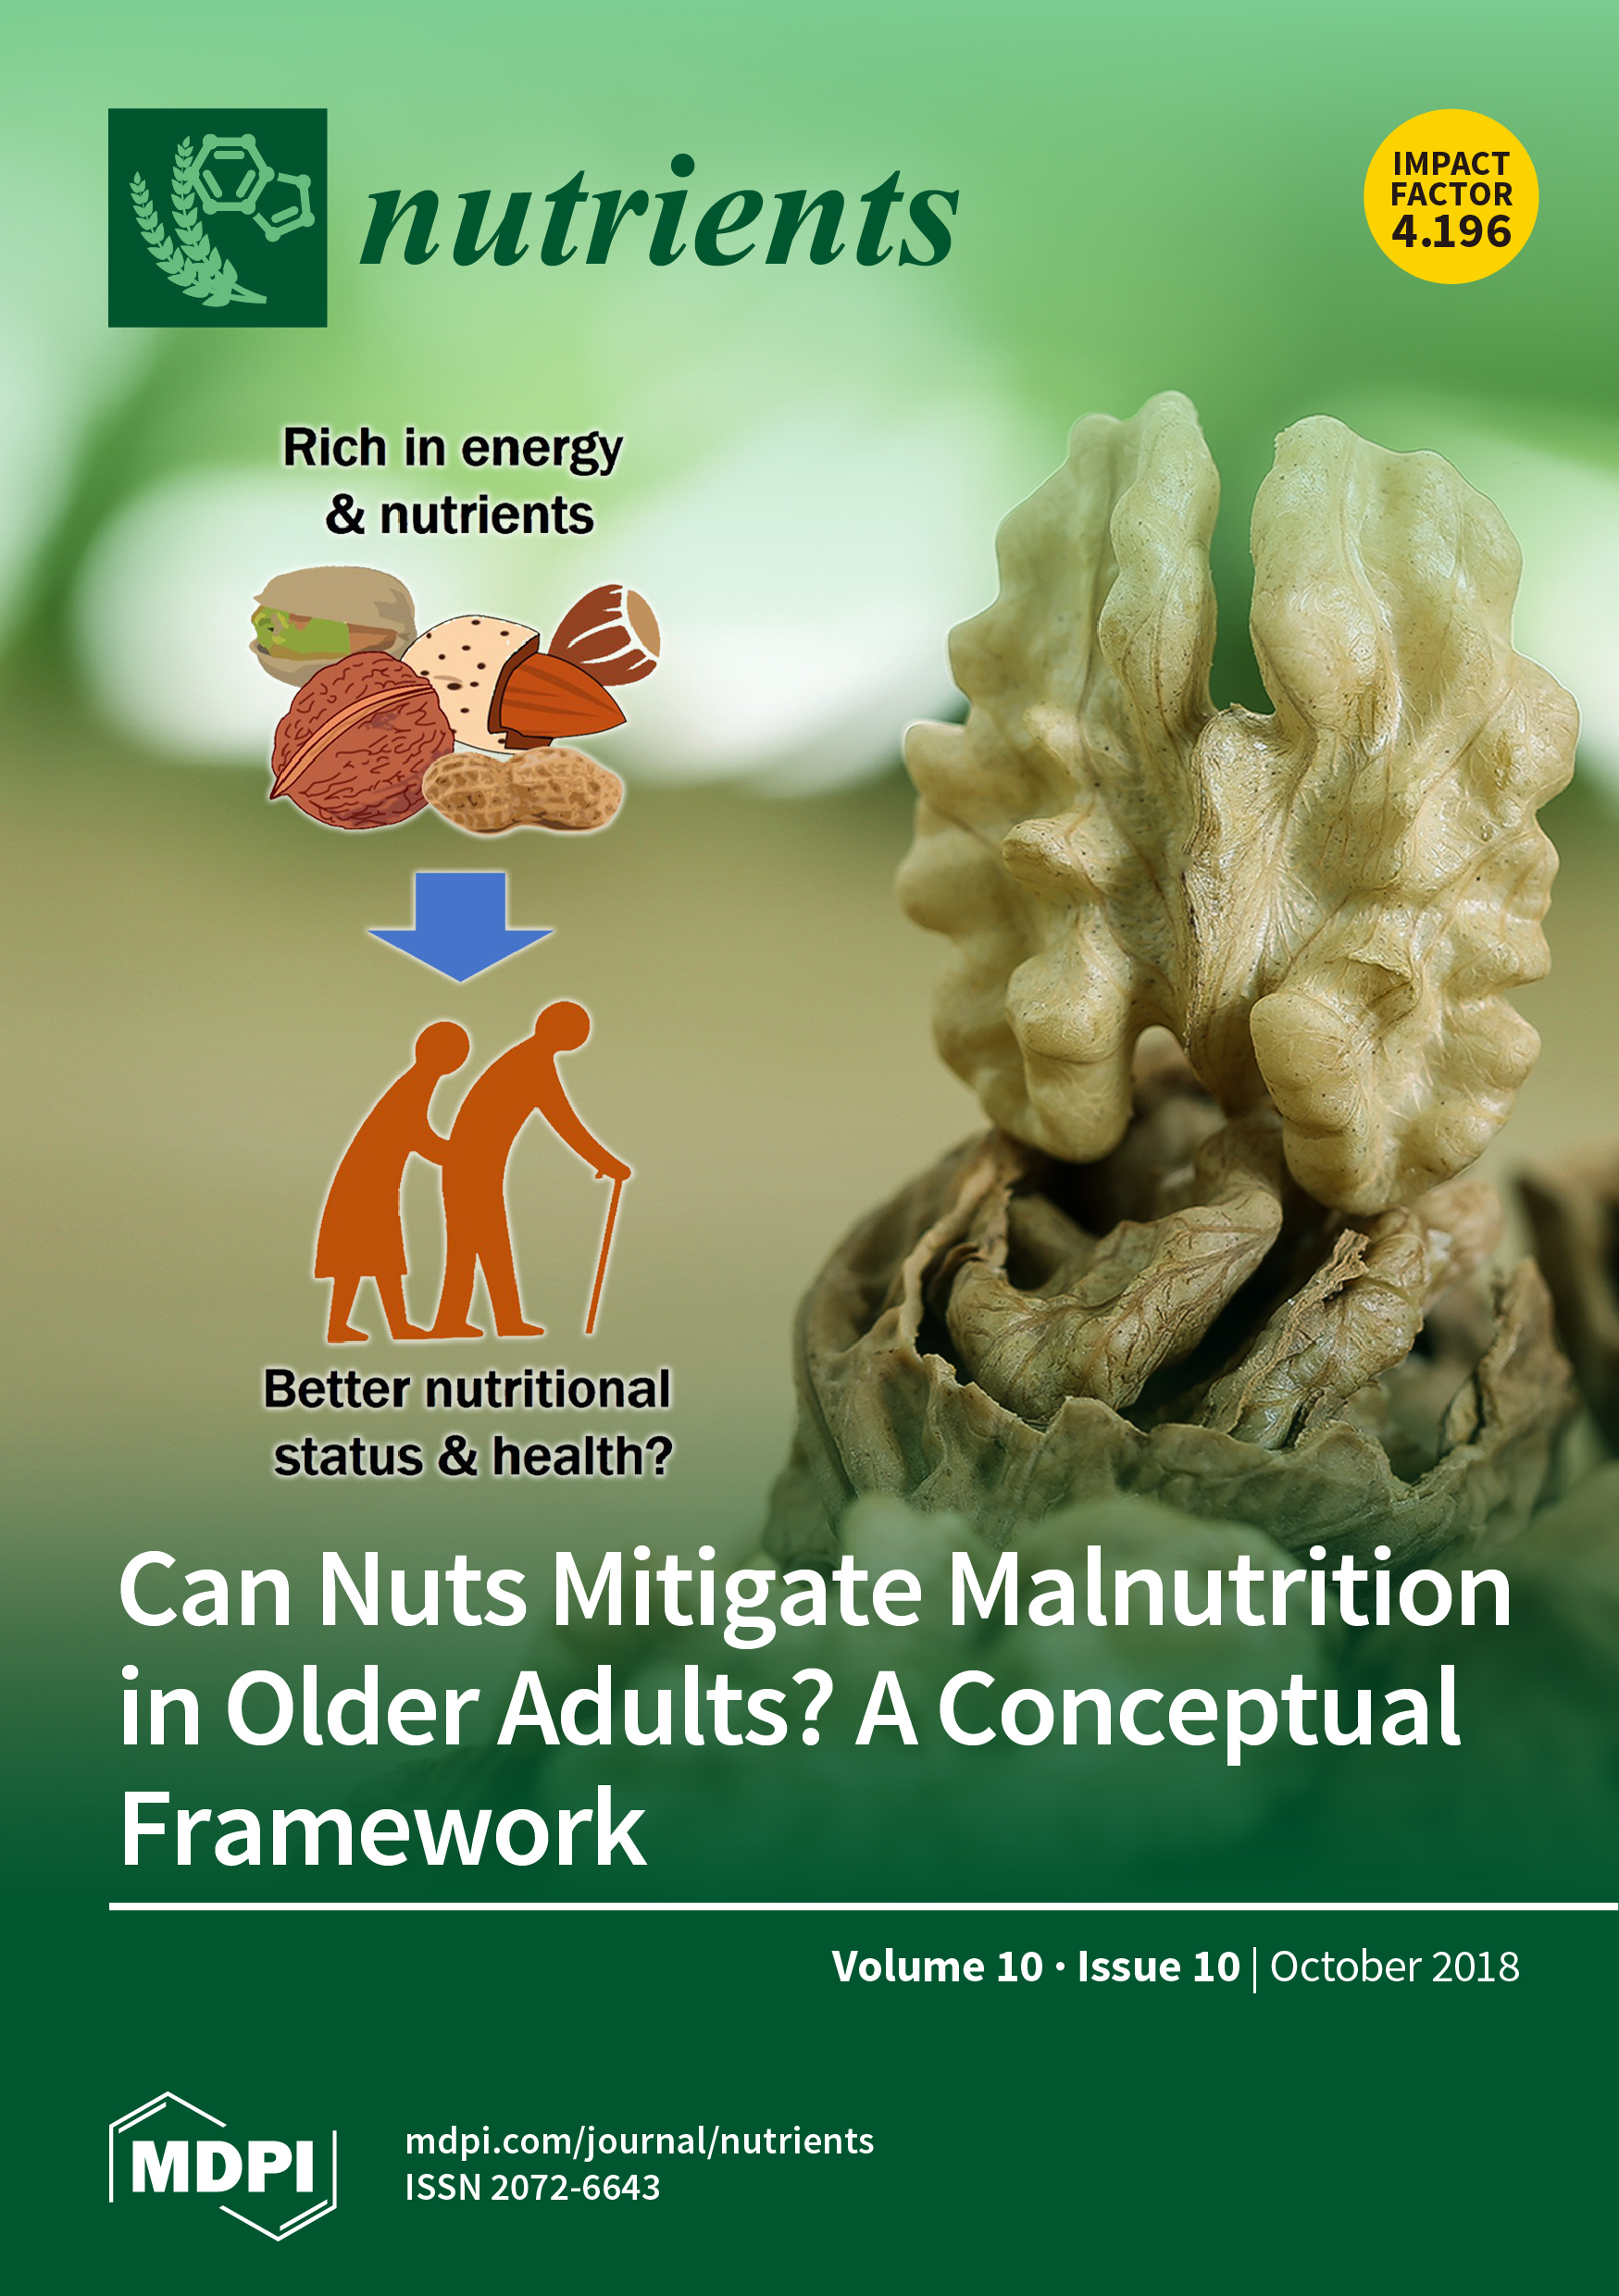 https://www.mdpi.com/files/uploaded/covers/nutrients/big_cover-nutrients-v10-i10.png